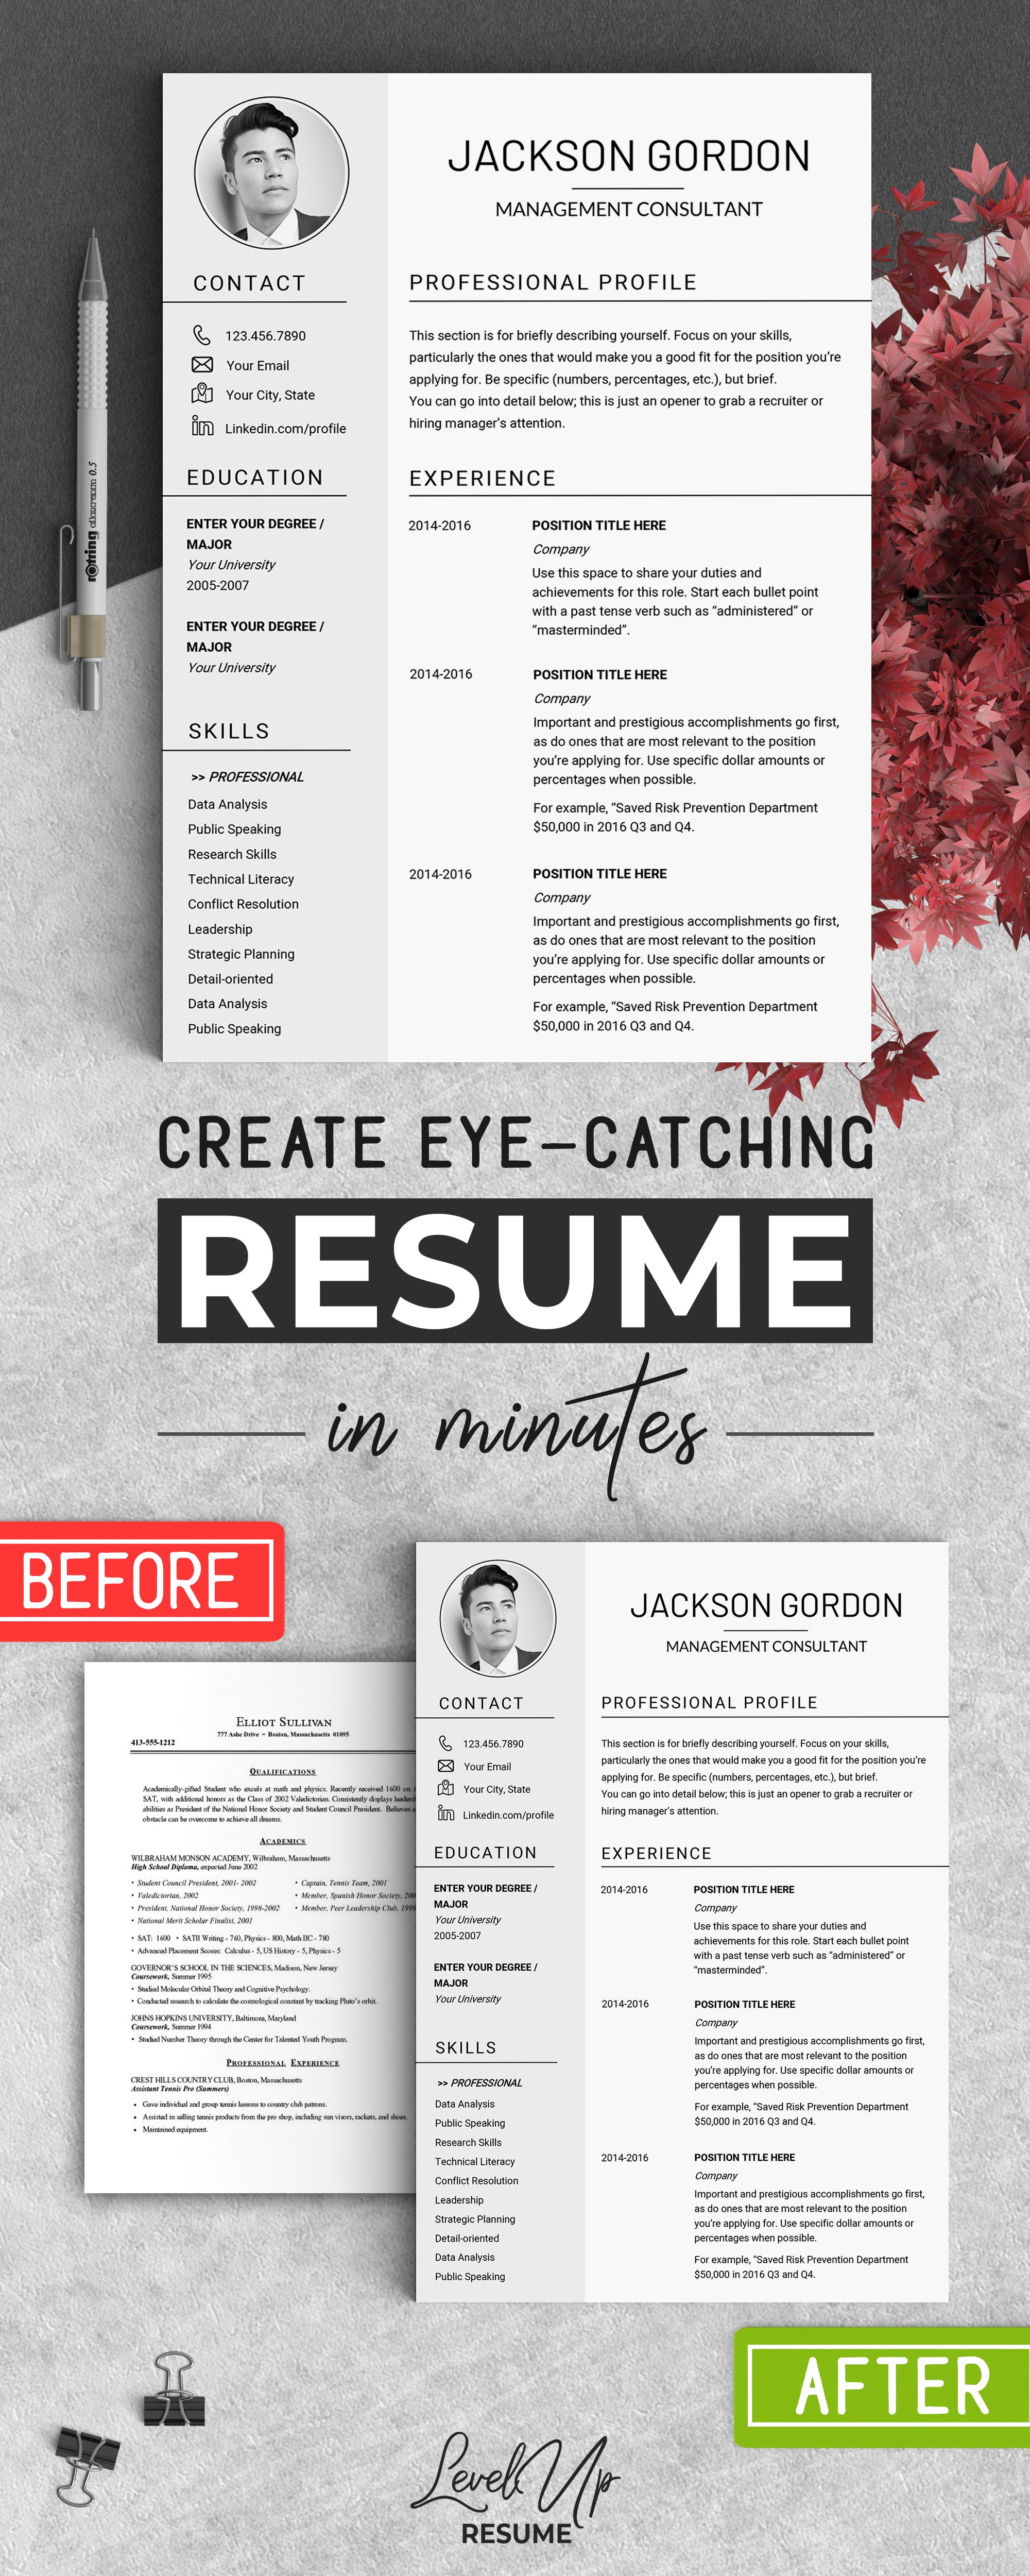 Professional RESUME TEMPLATE / JG cover image.